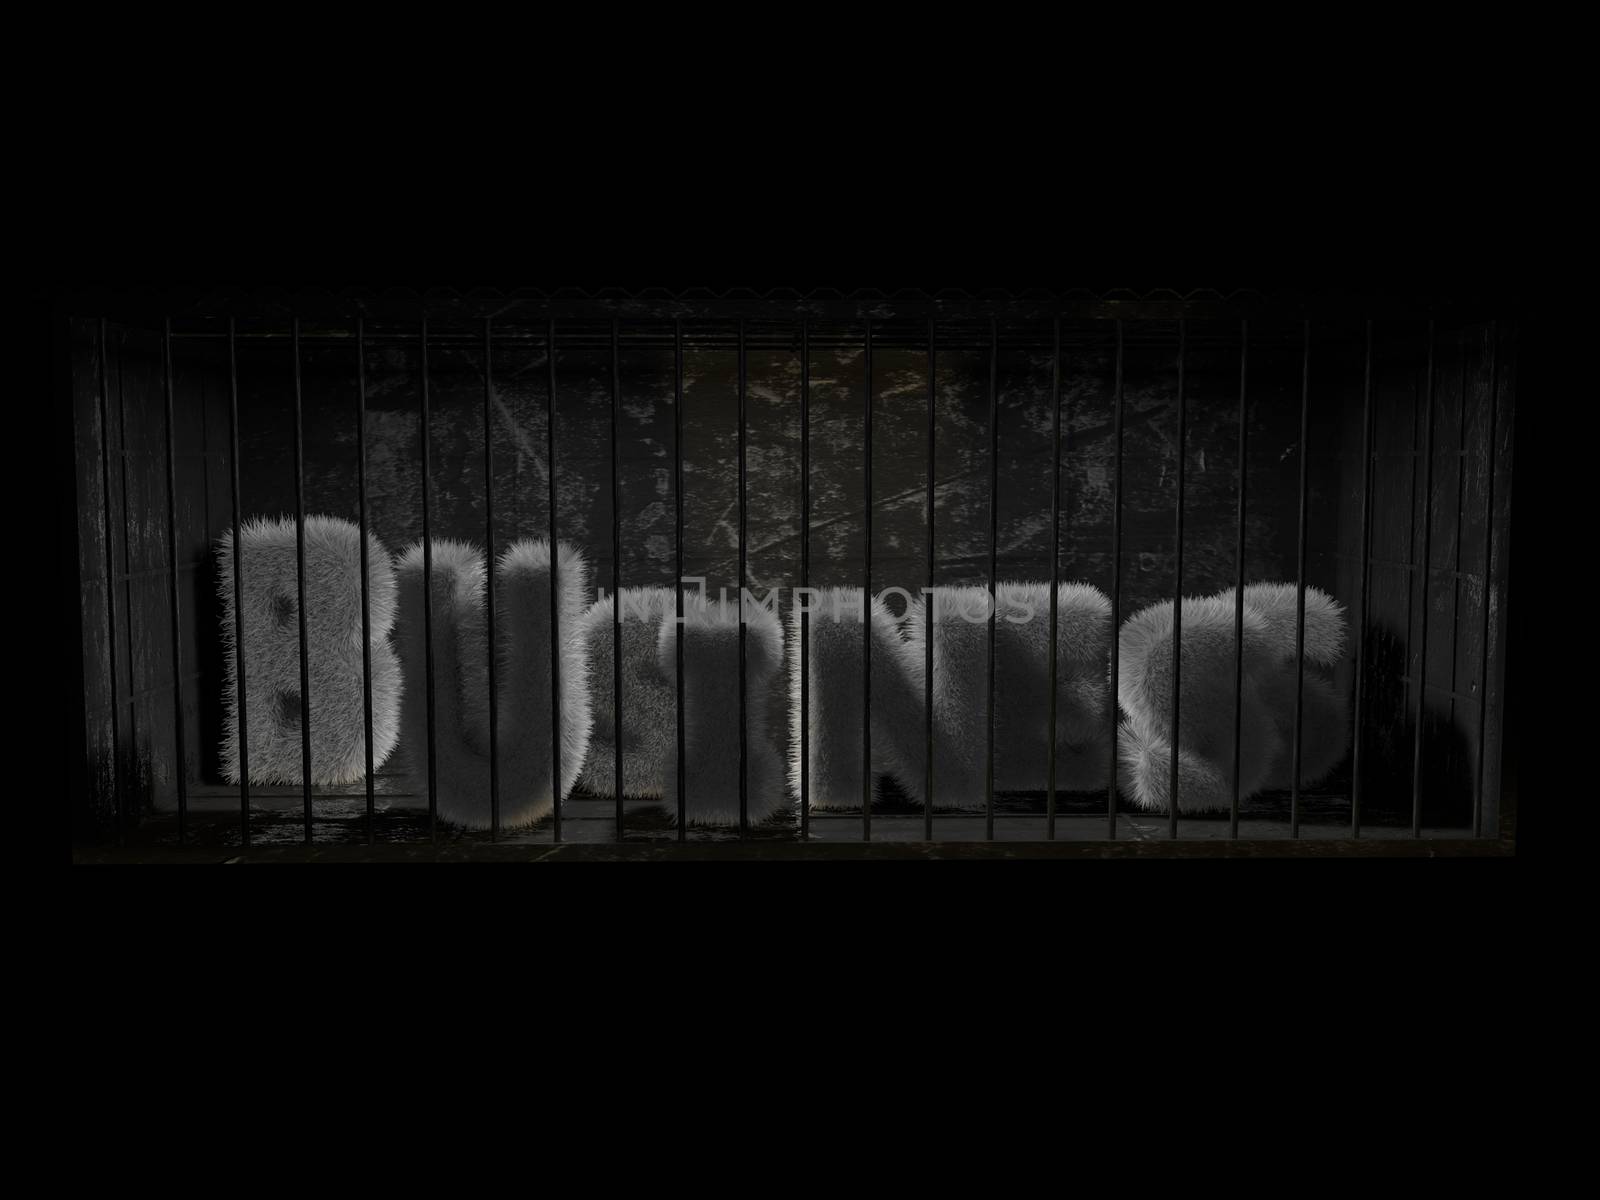 A fluffy word (business ) with white hair behind bars with black background.